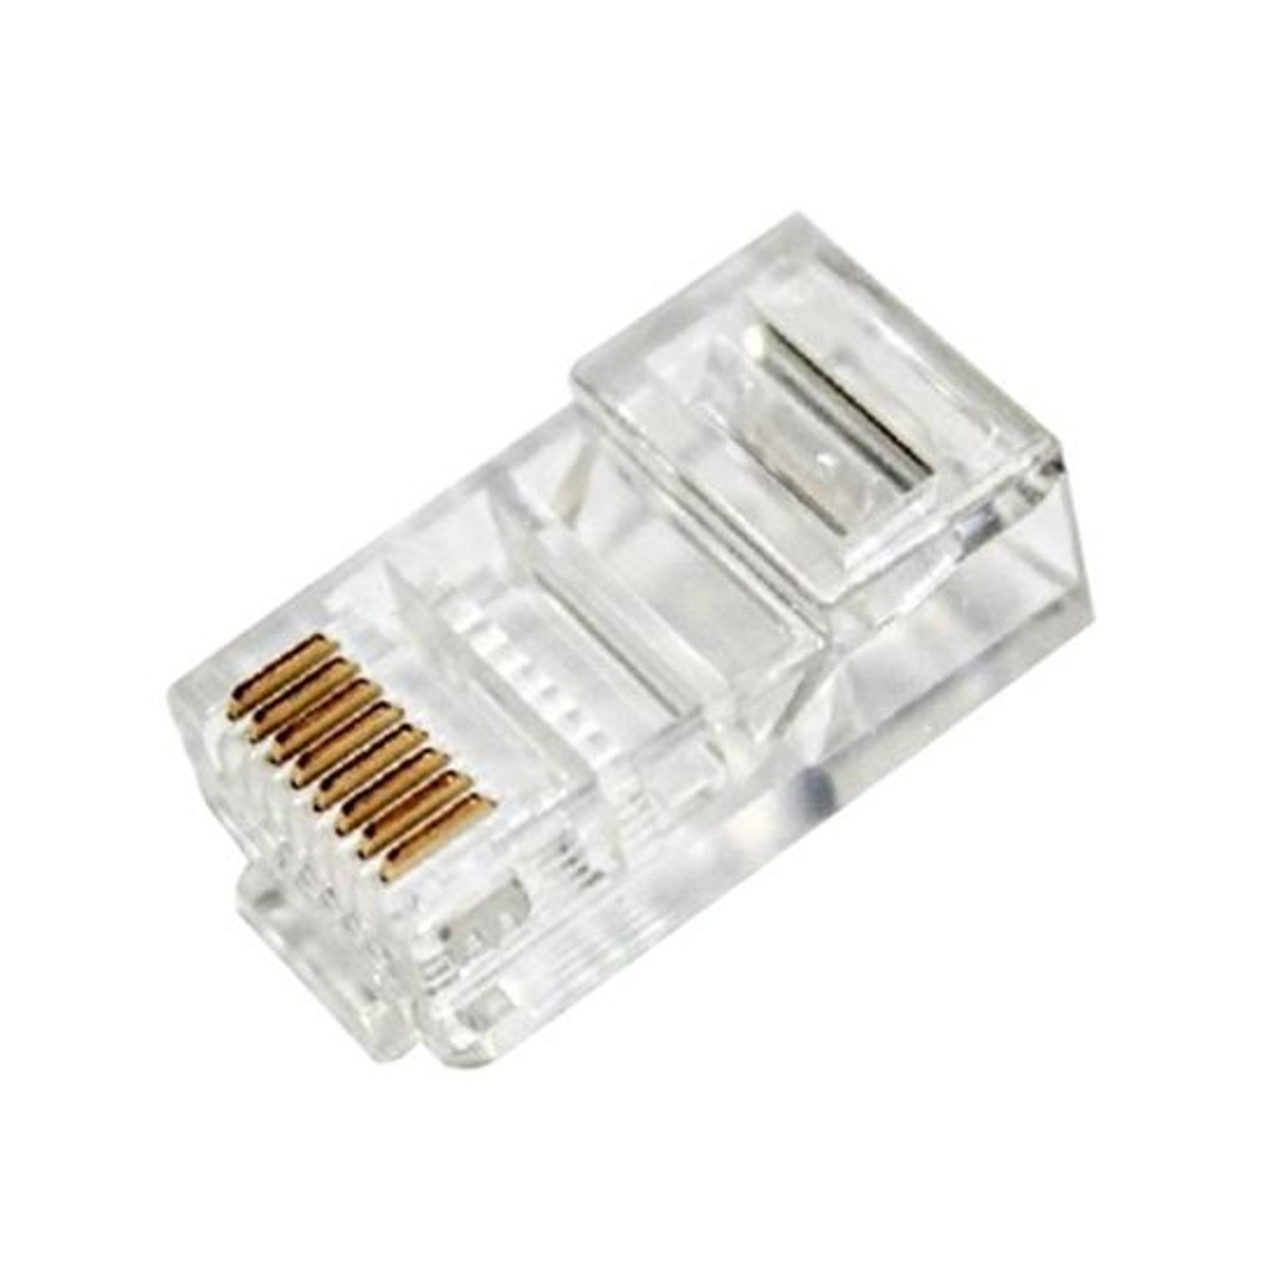 Eagle CAT5E Modular Plug Connector RJ45 25 Pack Solid Round Ideal Type 8P8C Gold Network Phone Line Plugs 8 Pin Audio Data Signal Snap-In Telephone CAT5 & CAT5E Connectors, Contractor Grade